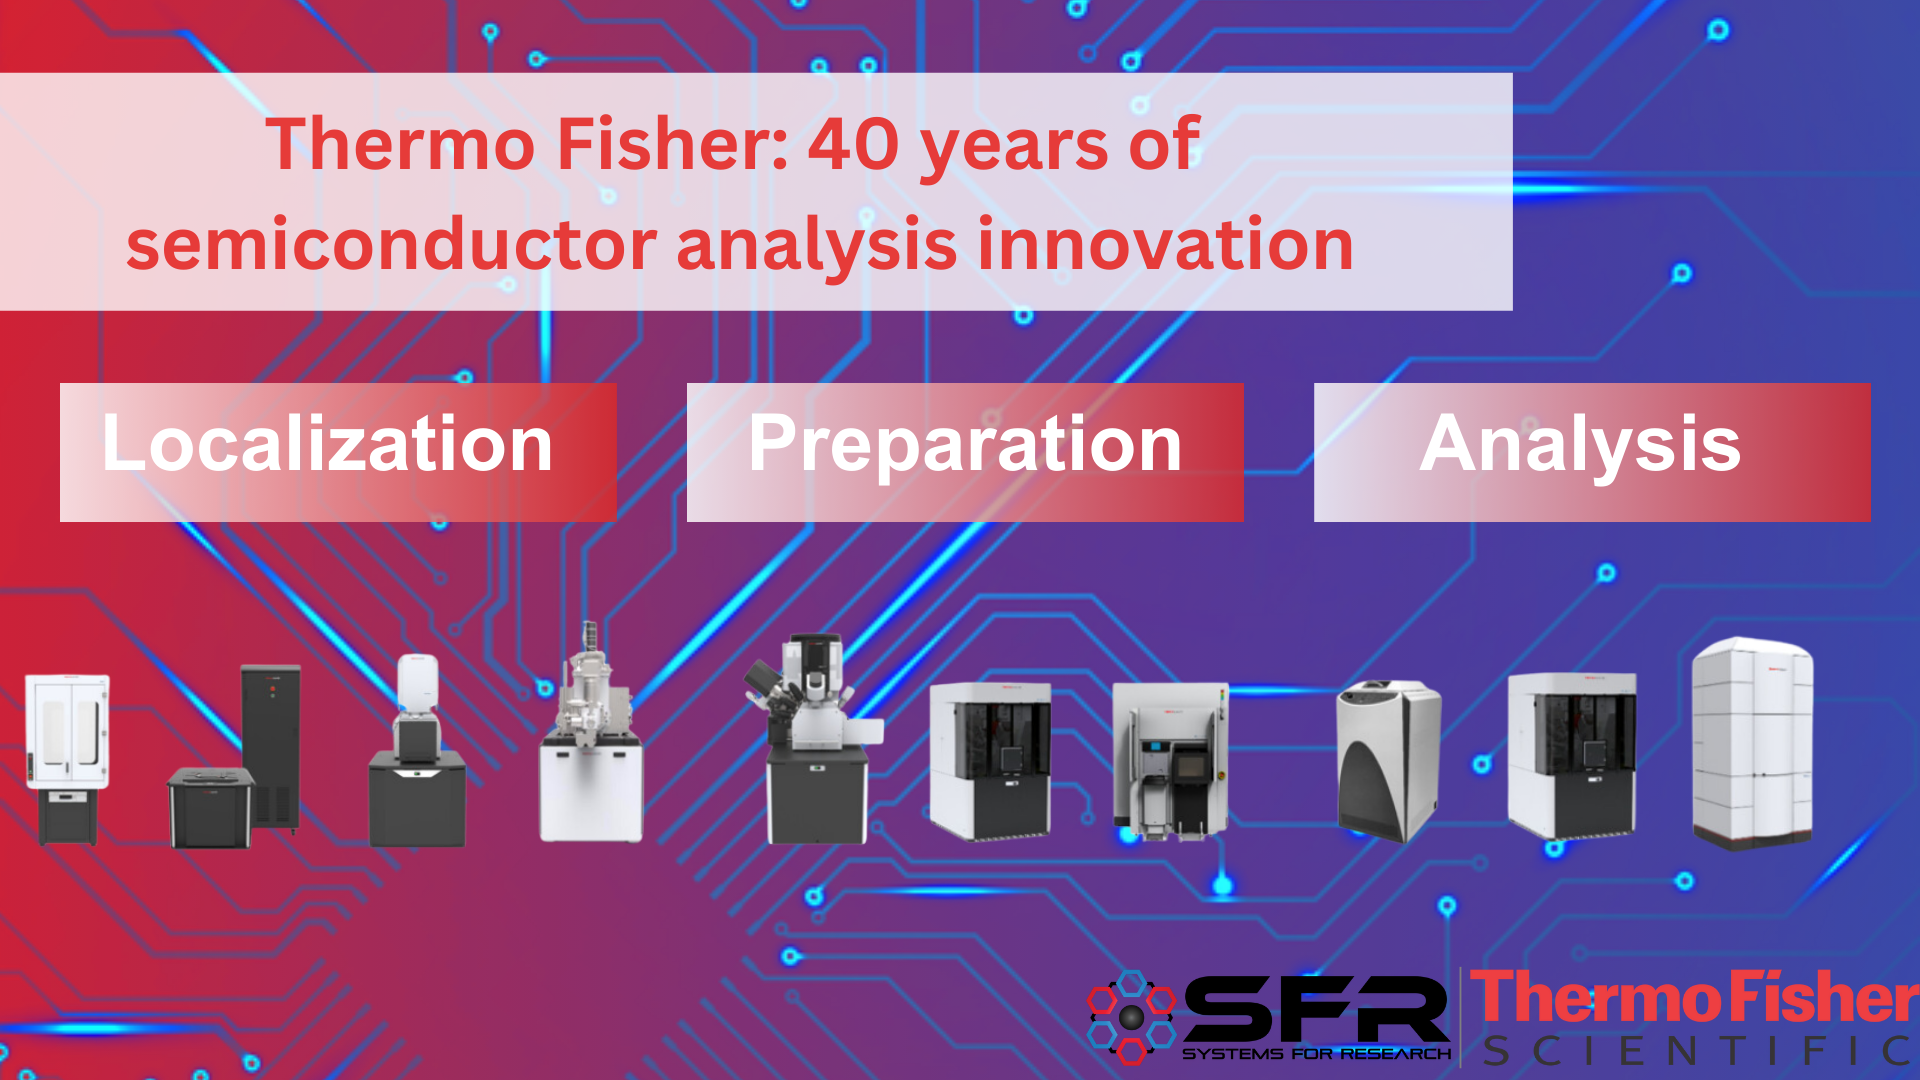 Thermo Fisher: 40 years in semiconductor analysis innovation poster